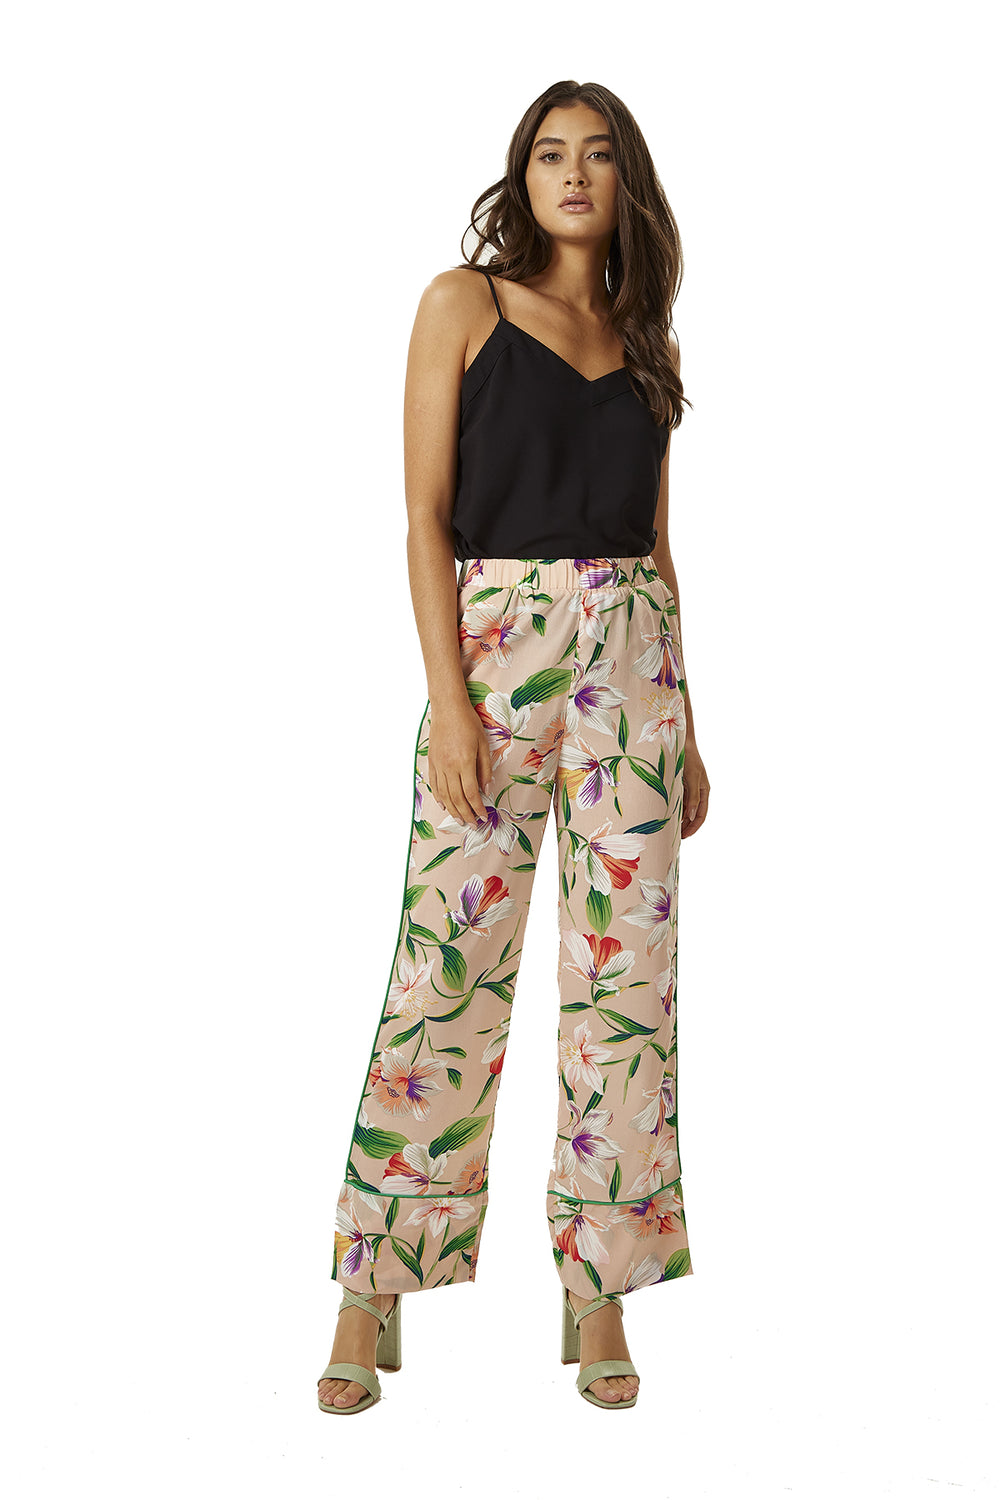 Liquorish Trousers in Floral Print with Green Piping